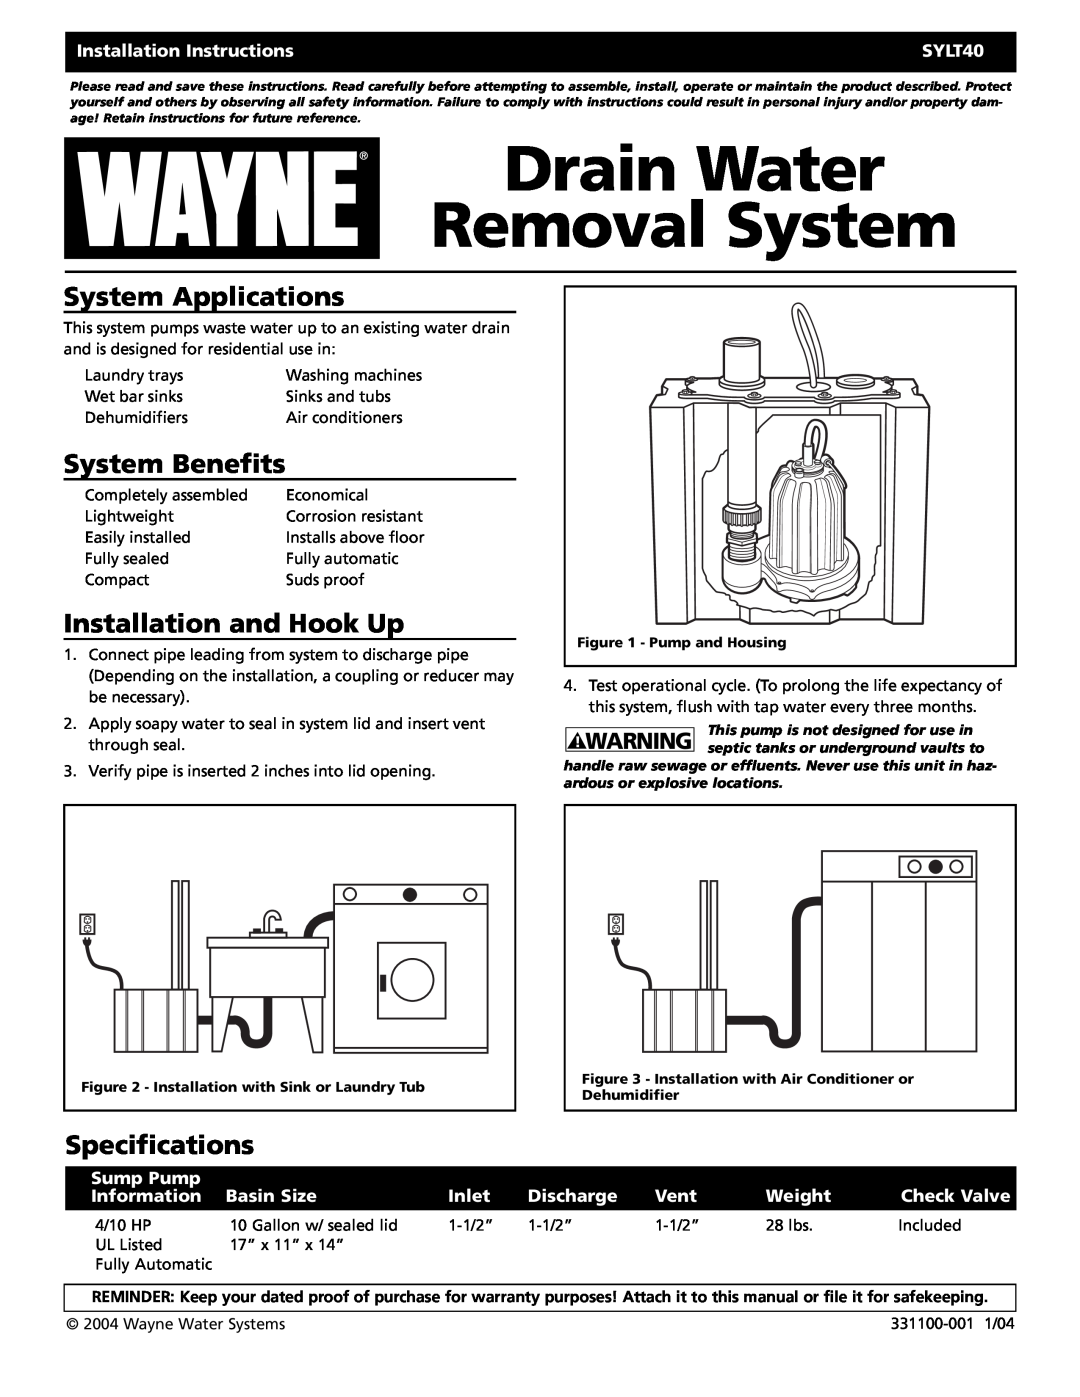 Wayne 331100-001 installation instructions Drain Water Removal System, System Applications, System Benefits, SYLT40, Inlet 